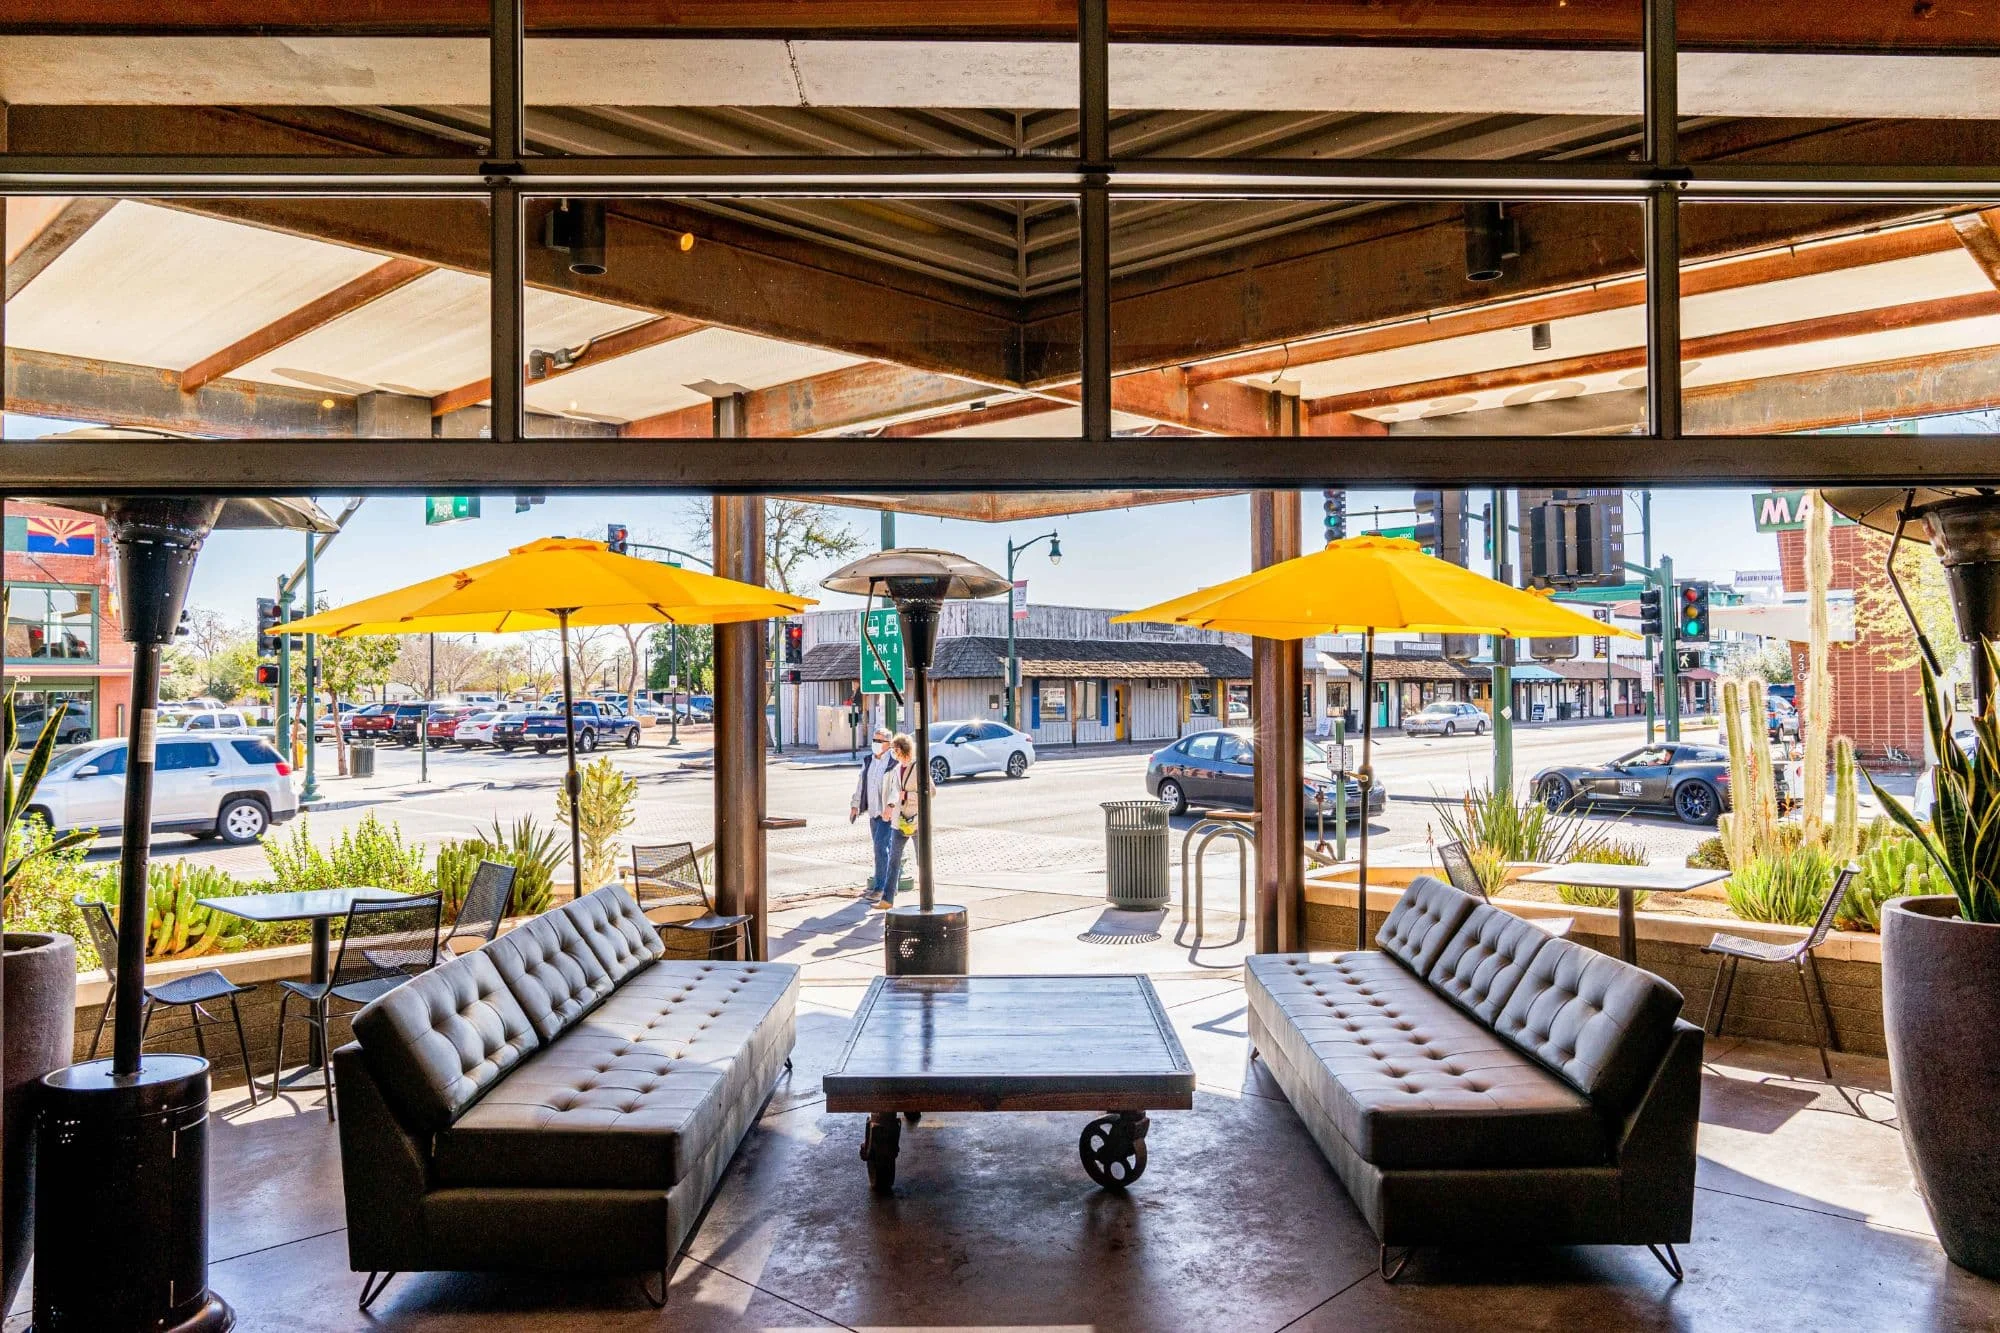 A restaurant patio with leather sofas and yellow umbrellas.